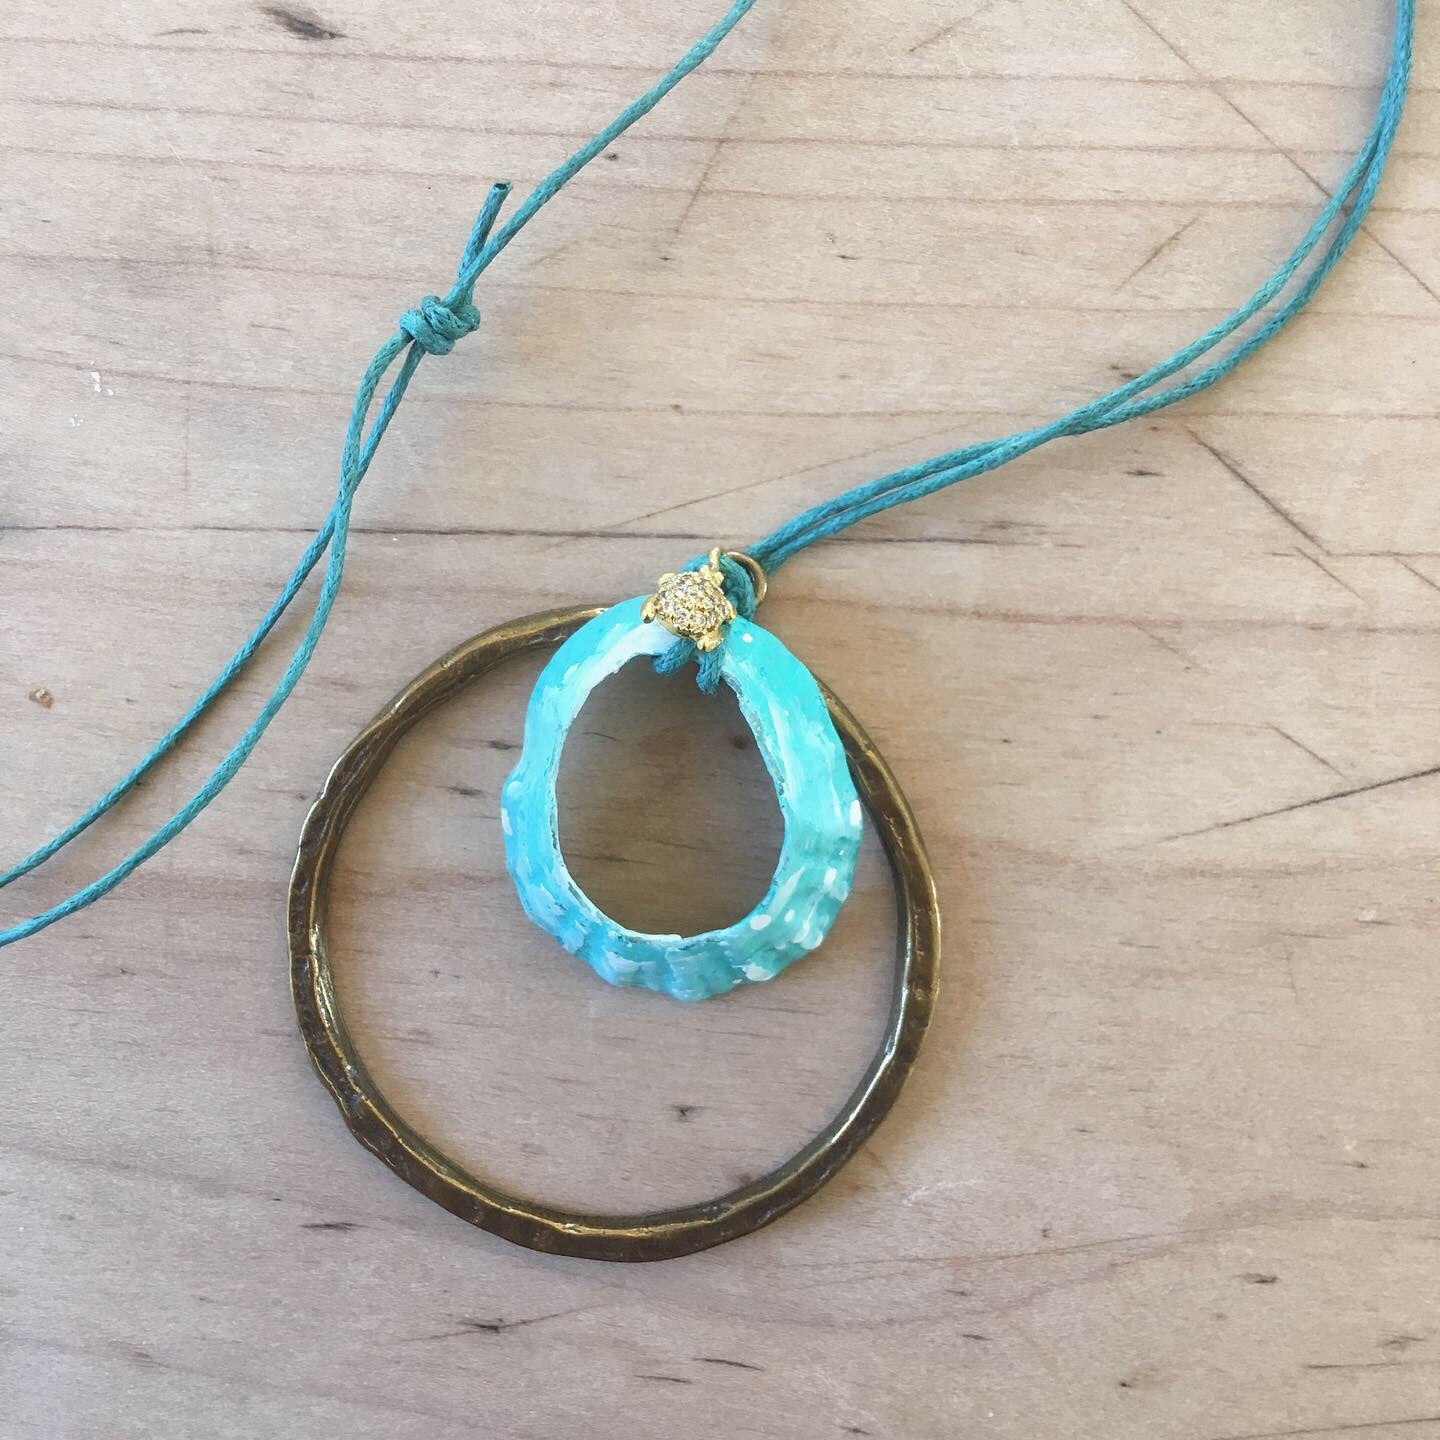 Hand Painted Limpet Necklace in Aqua with Brass Hoop and Cubic Zirconia Turtle